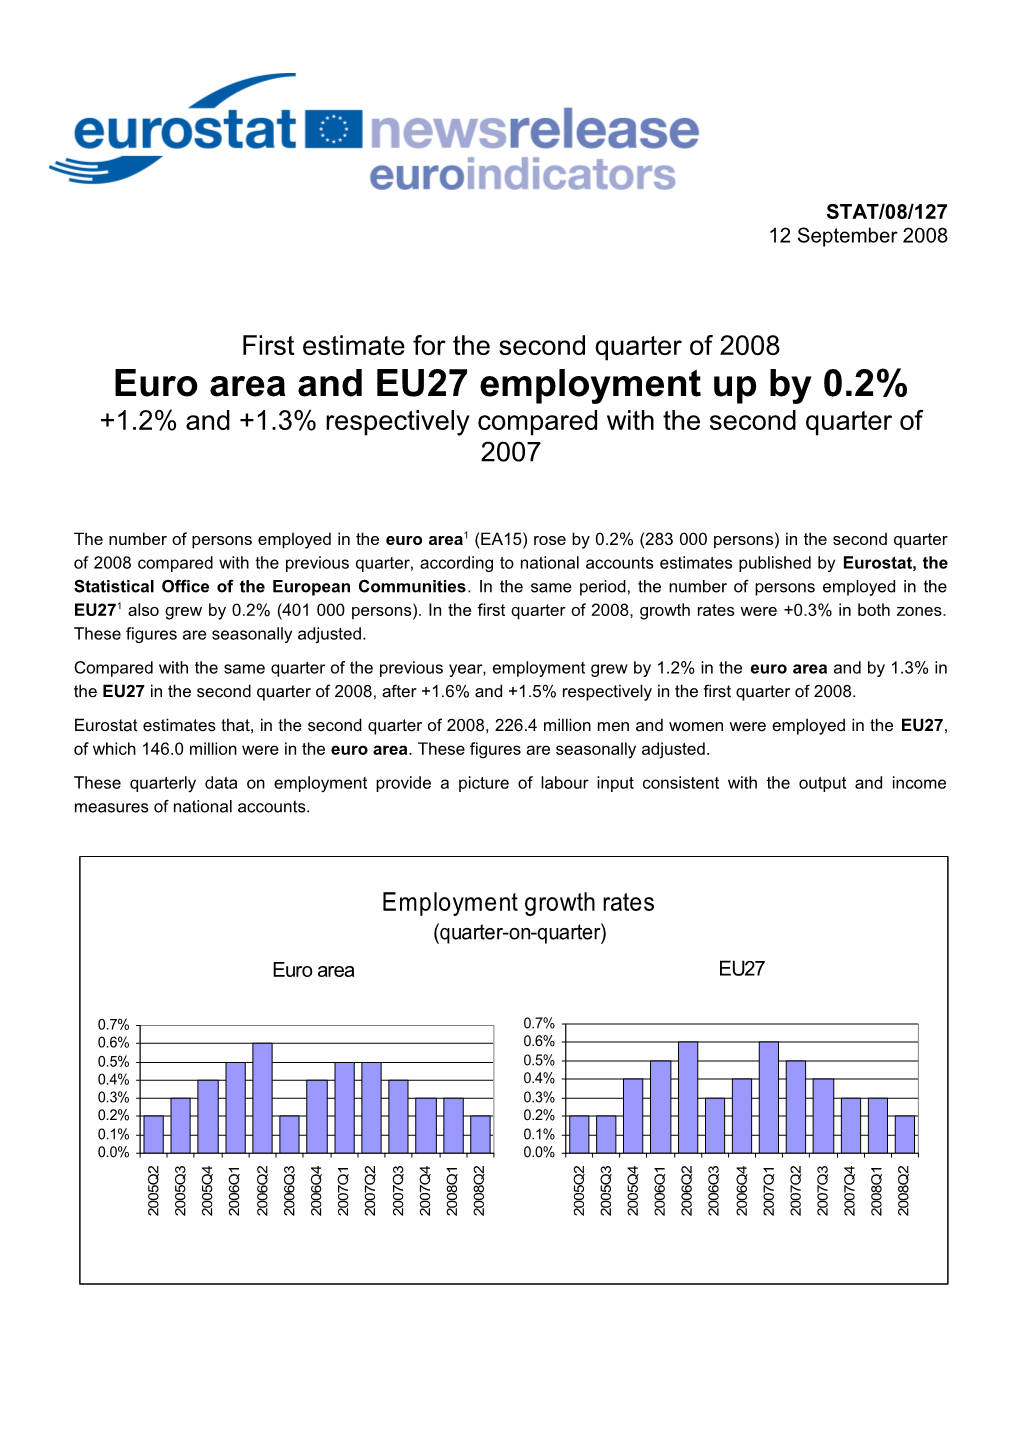 First Estimate for the Secondquarter of 2008 Euro Areaand EU27 Employment up by 0.2% +1.2%